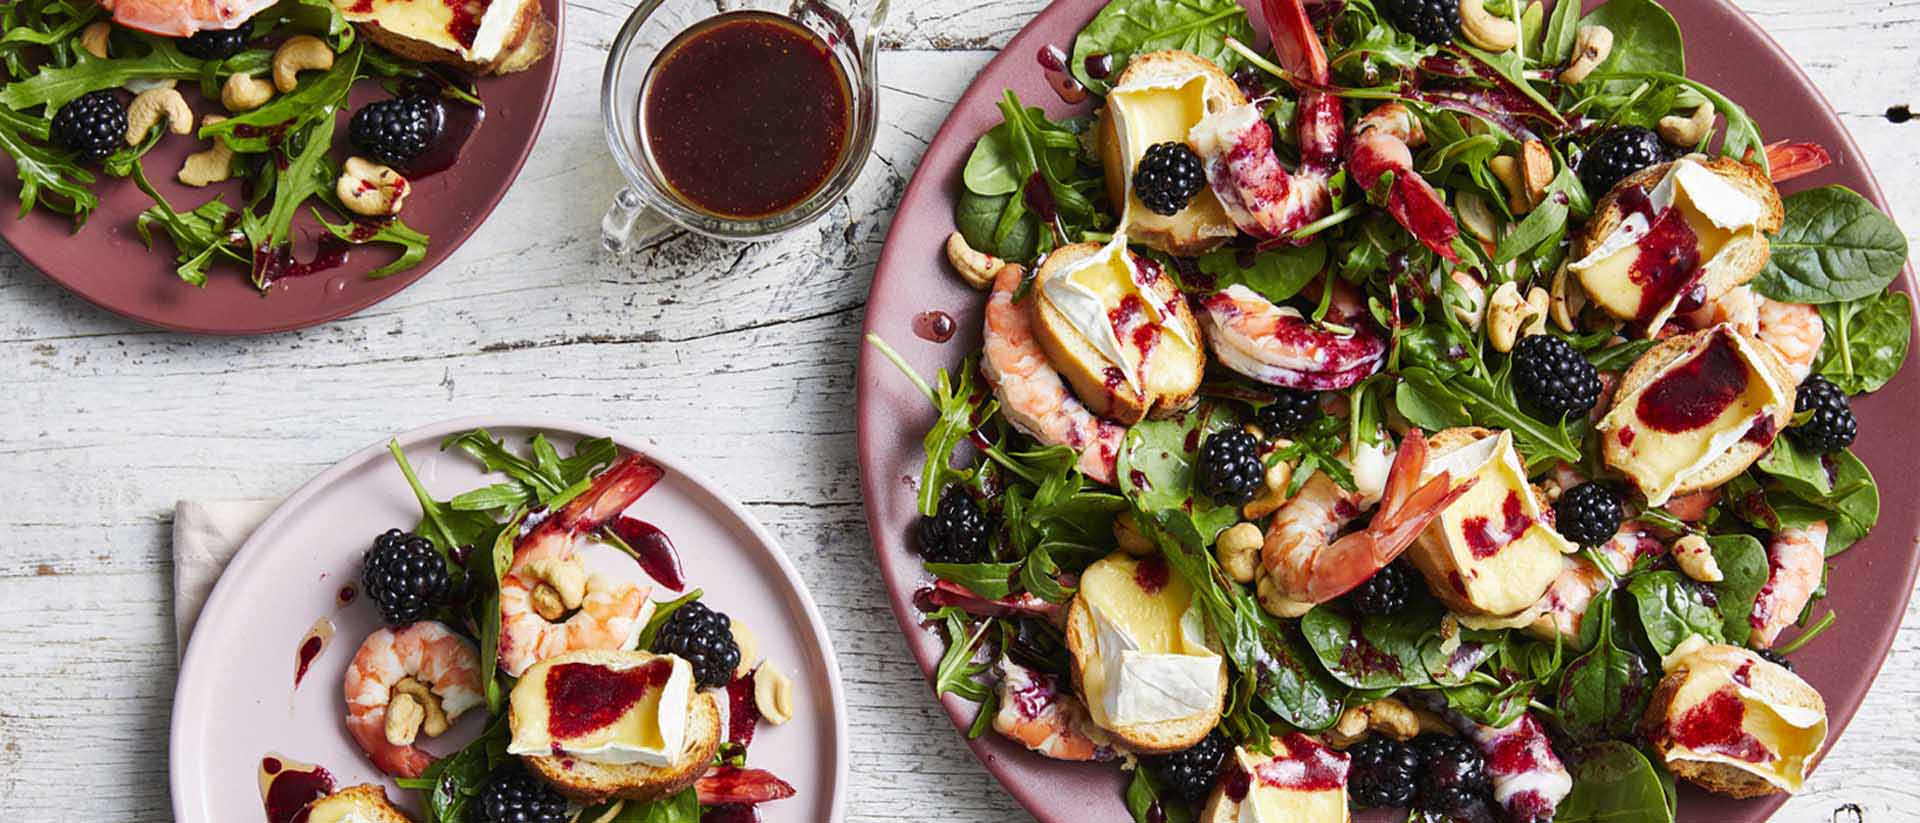 Perfection Blackberry And Prawn Rocket Salad With Brie Croutons Recipe